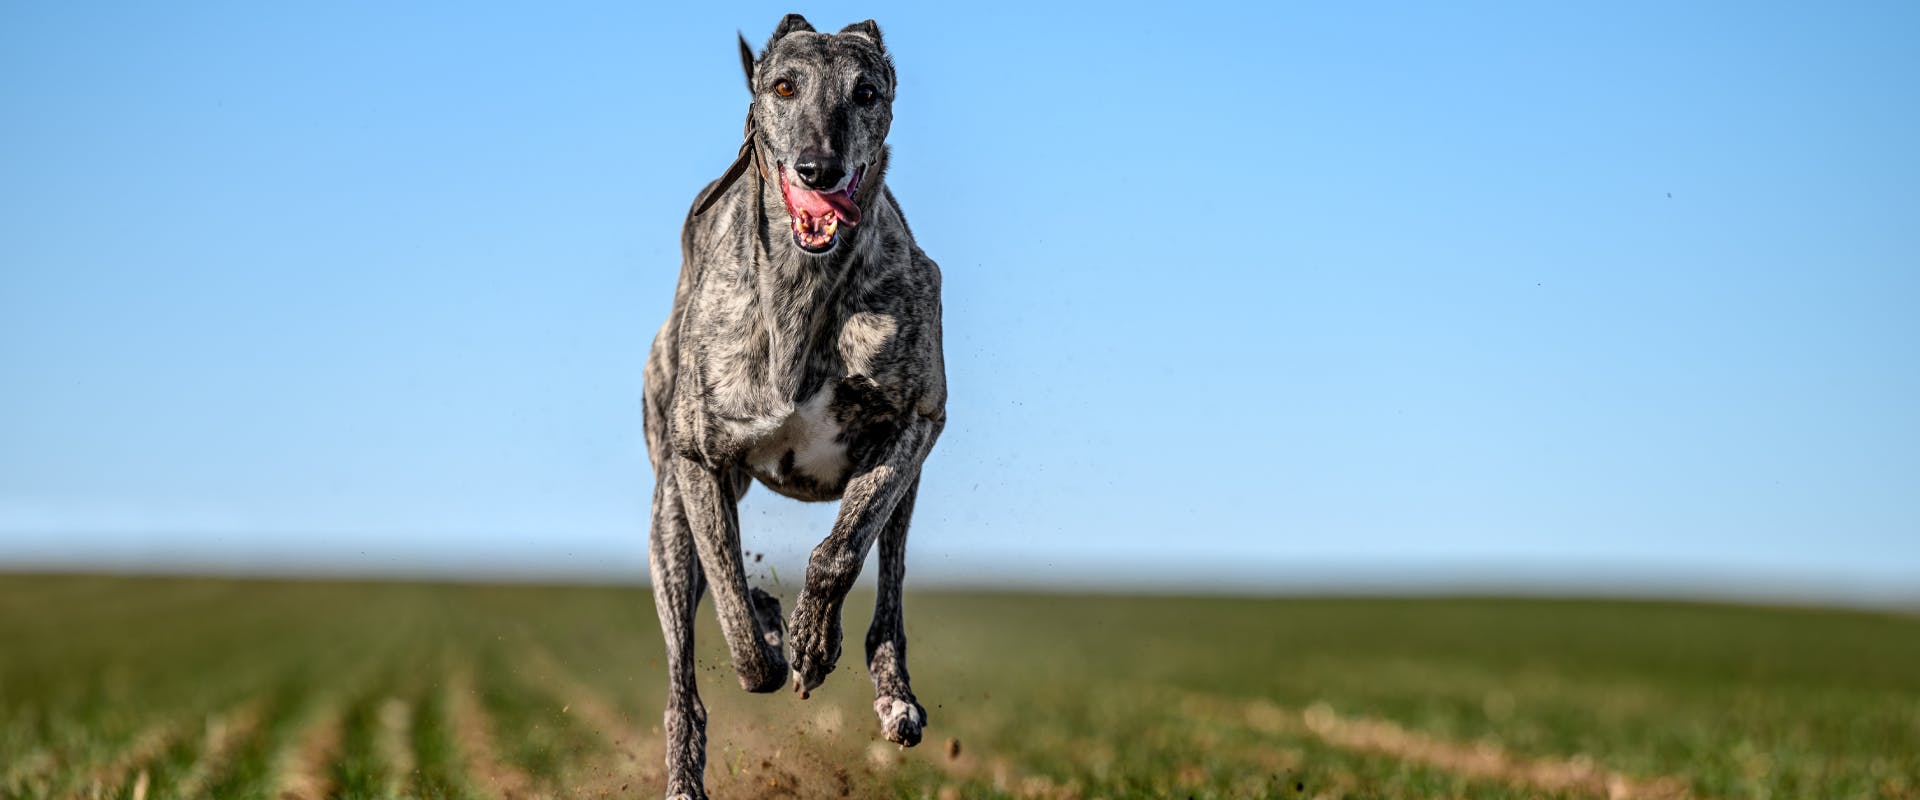 a greyhound running through a field with its tongue hanging out